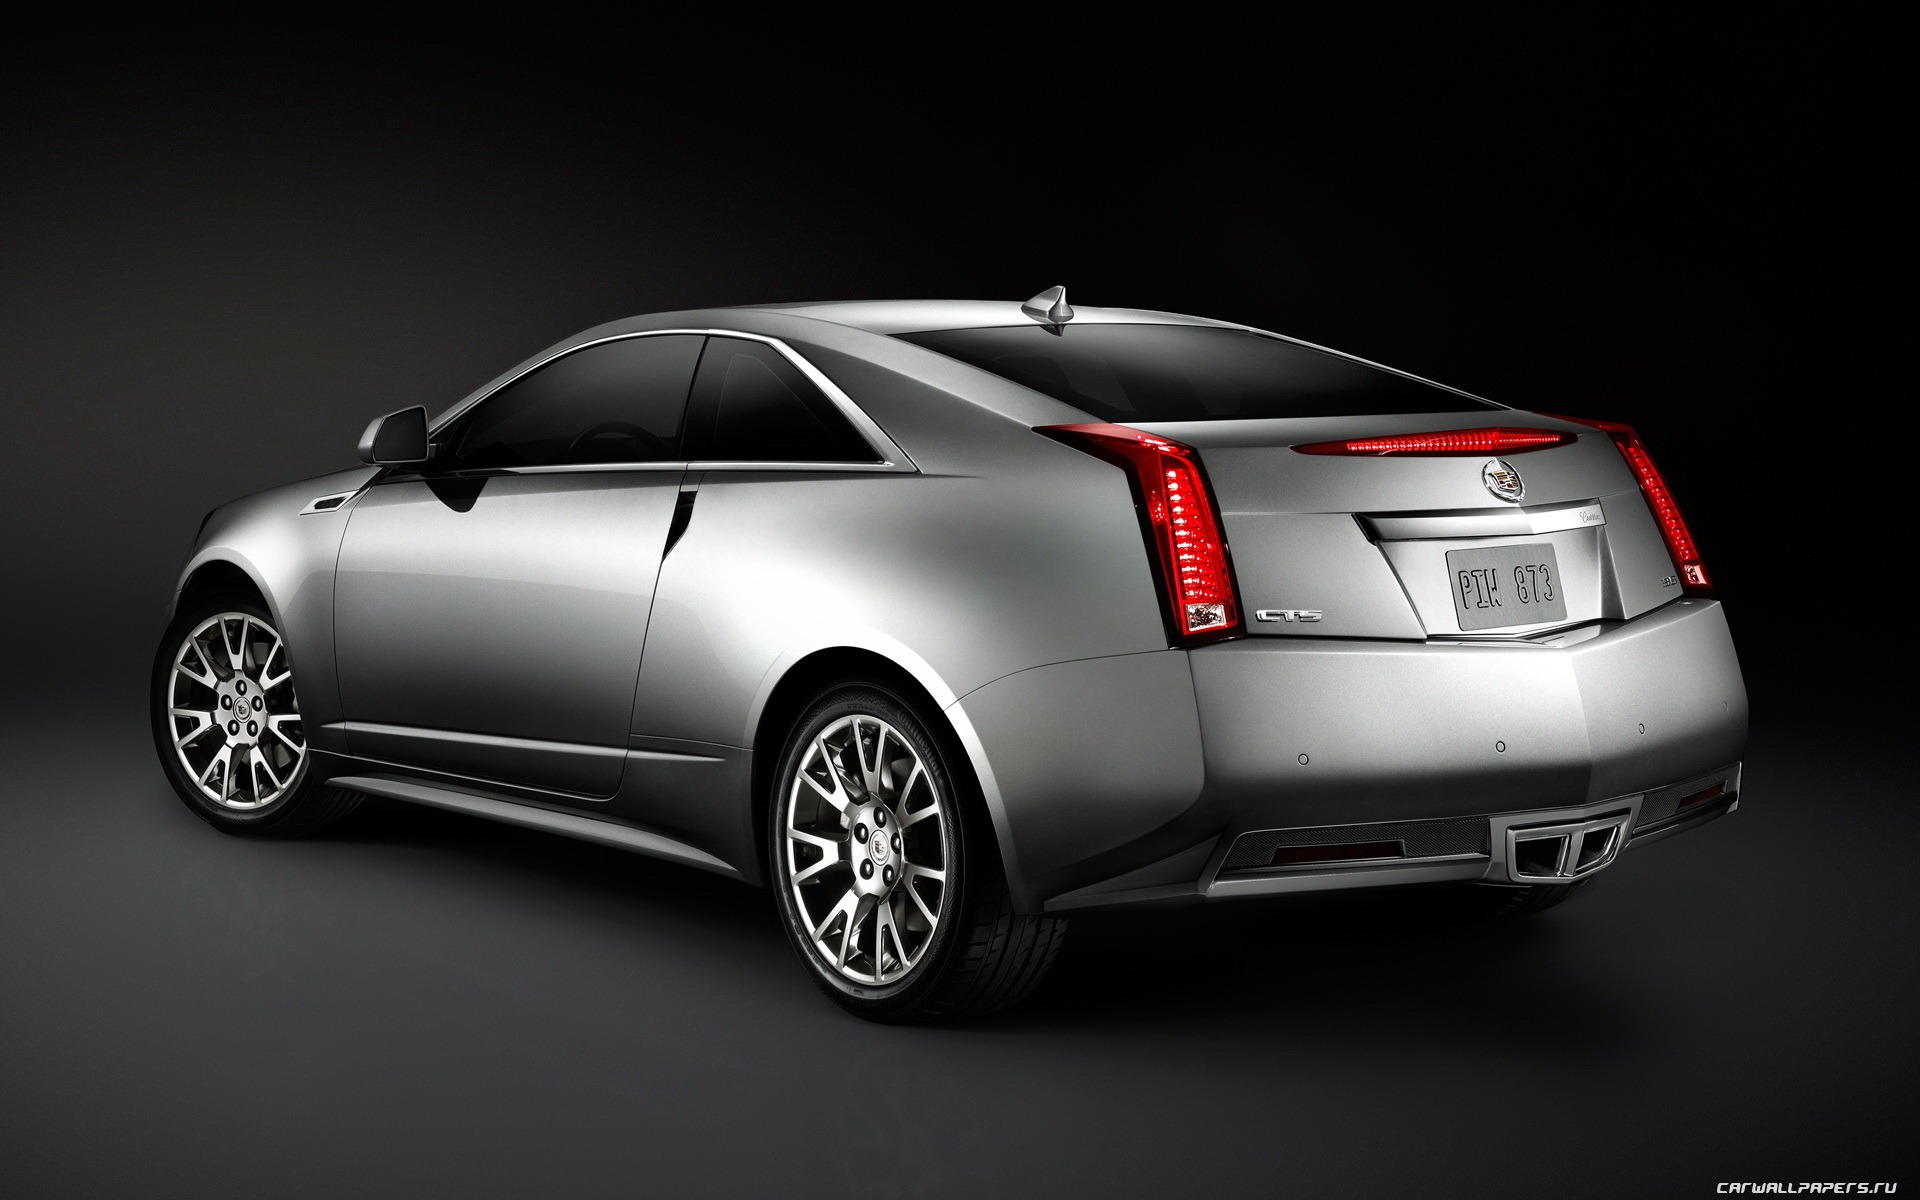 Cadillac CTS Coupe - 2011 HD Wallpaper #6 - 1920x1200